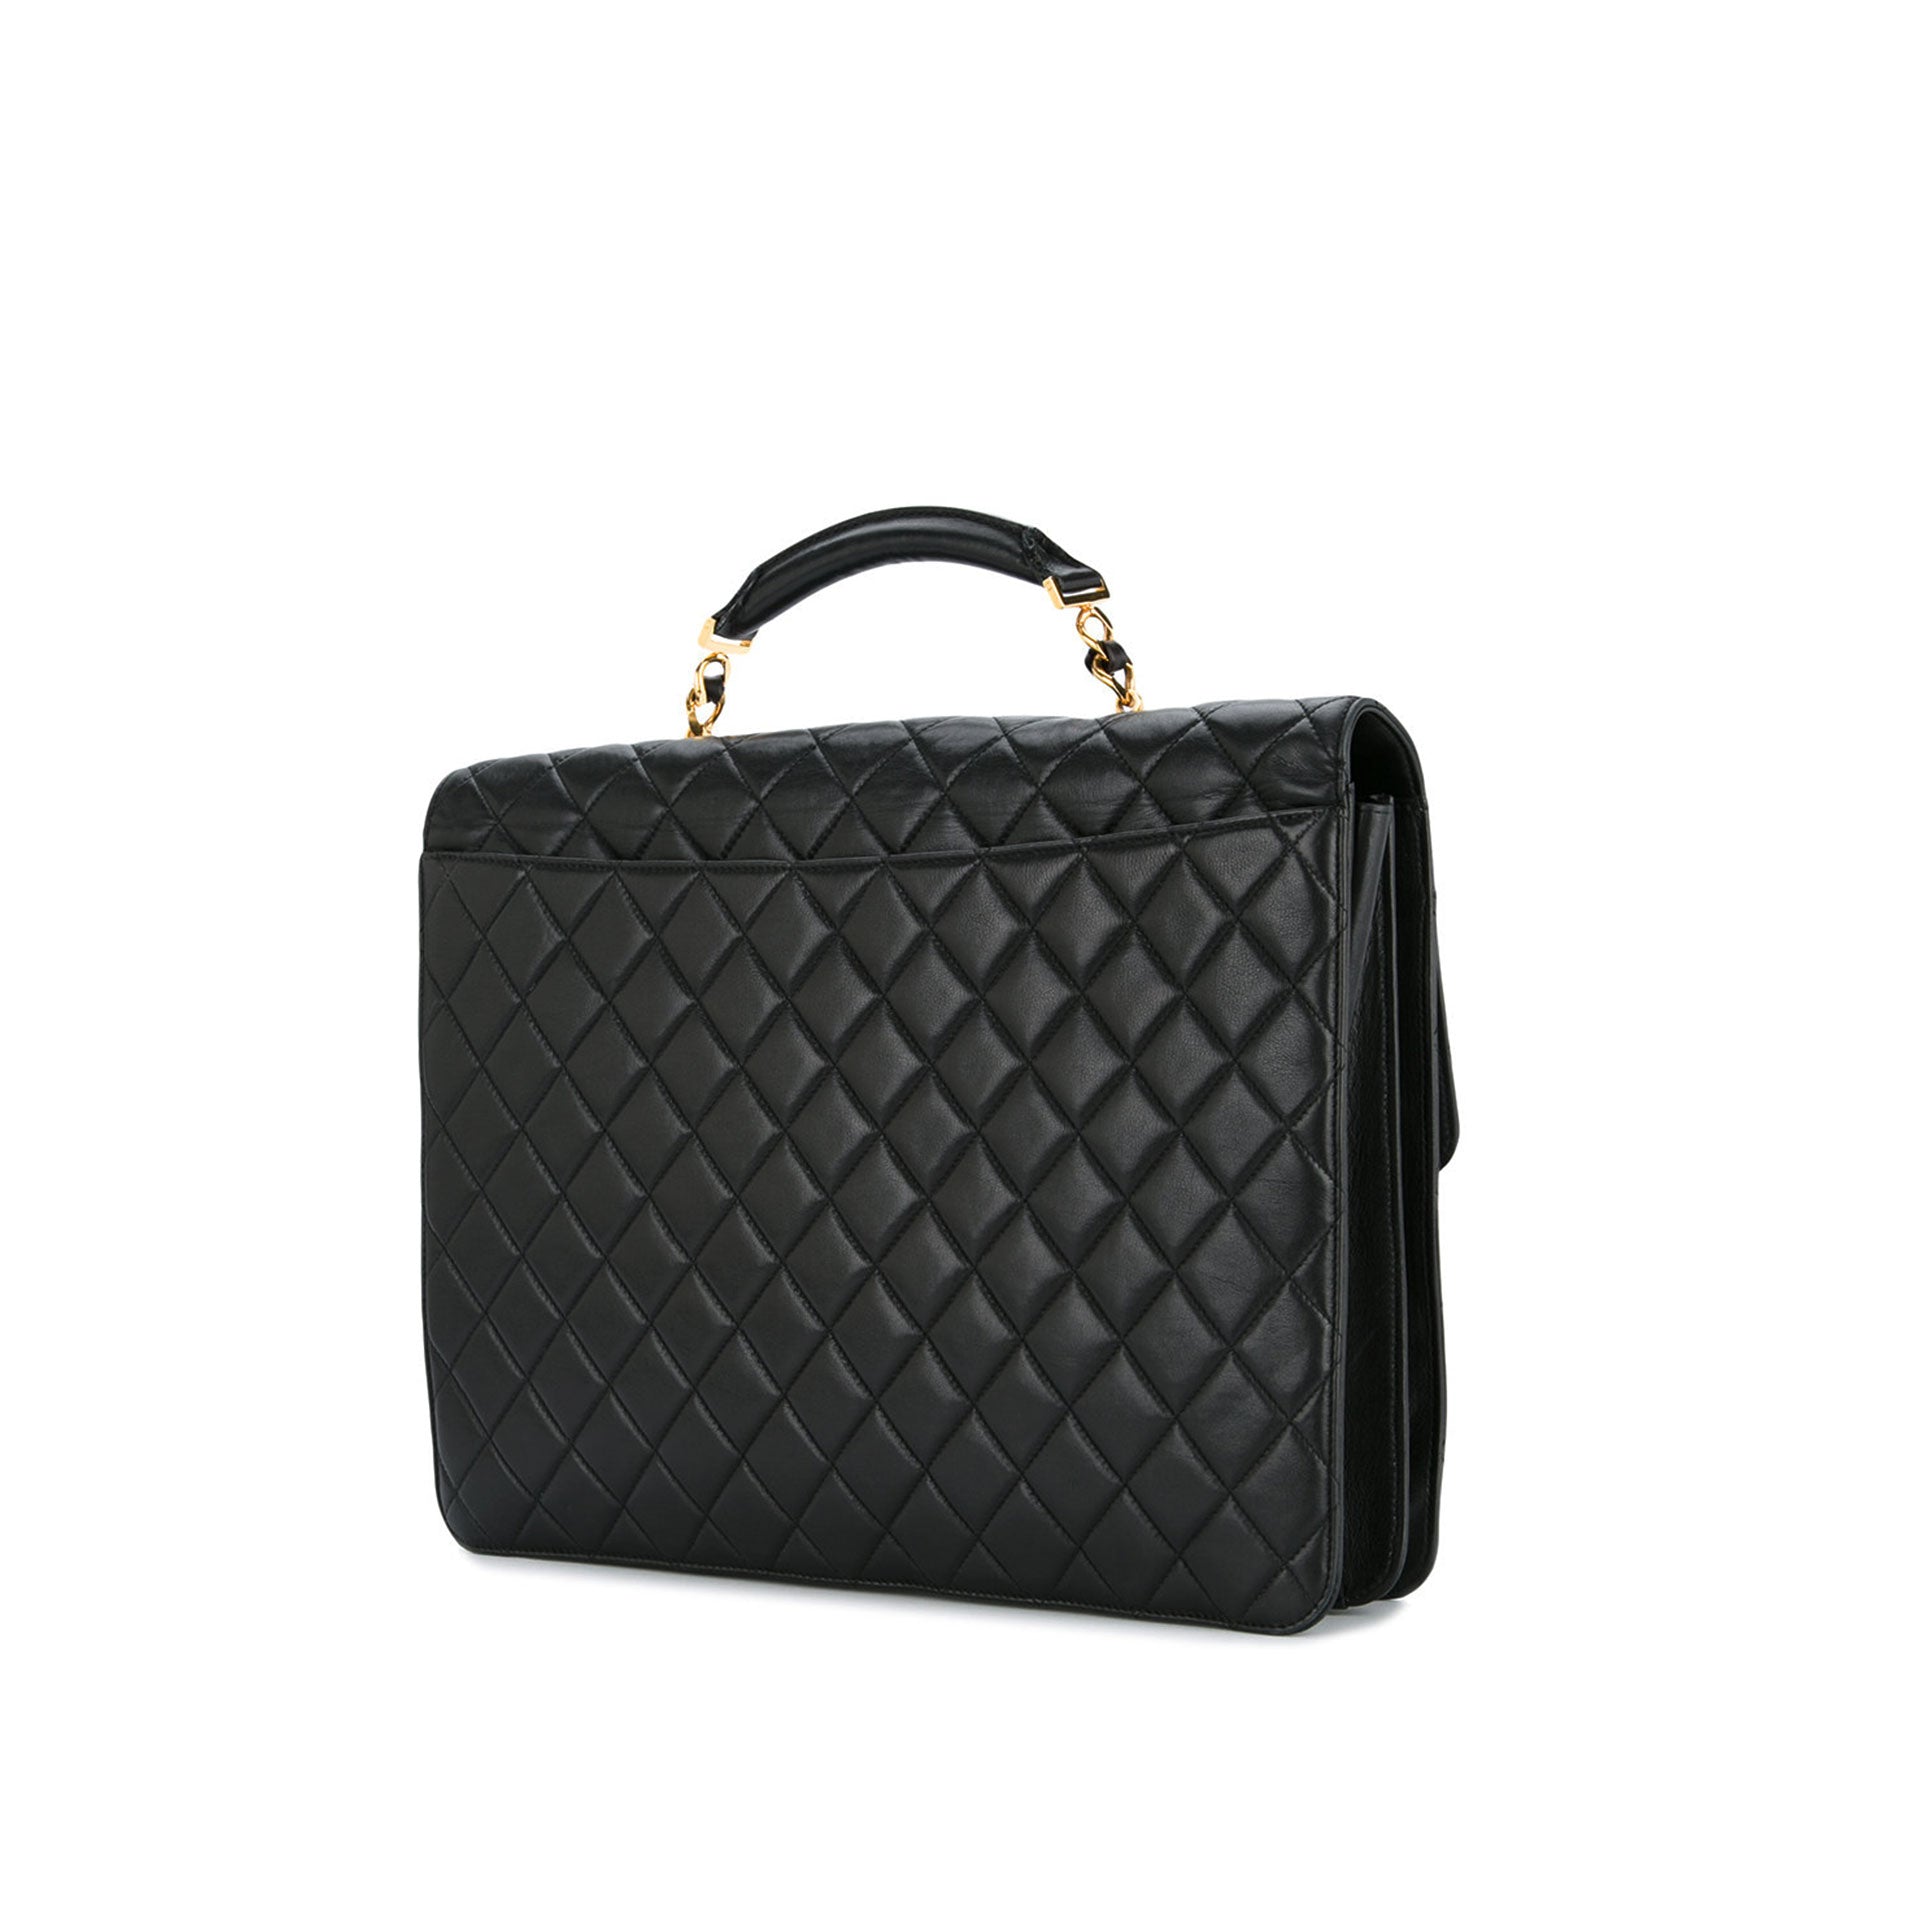 Impossible-to-Find Chanel Handbags Are House of Carver's Stock-in-Trade - 1stDibs  Introspective